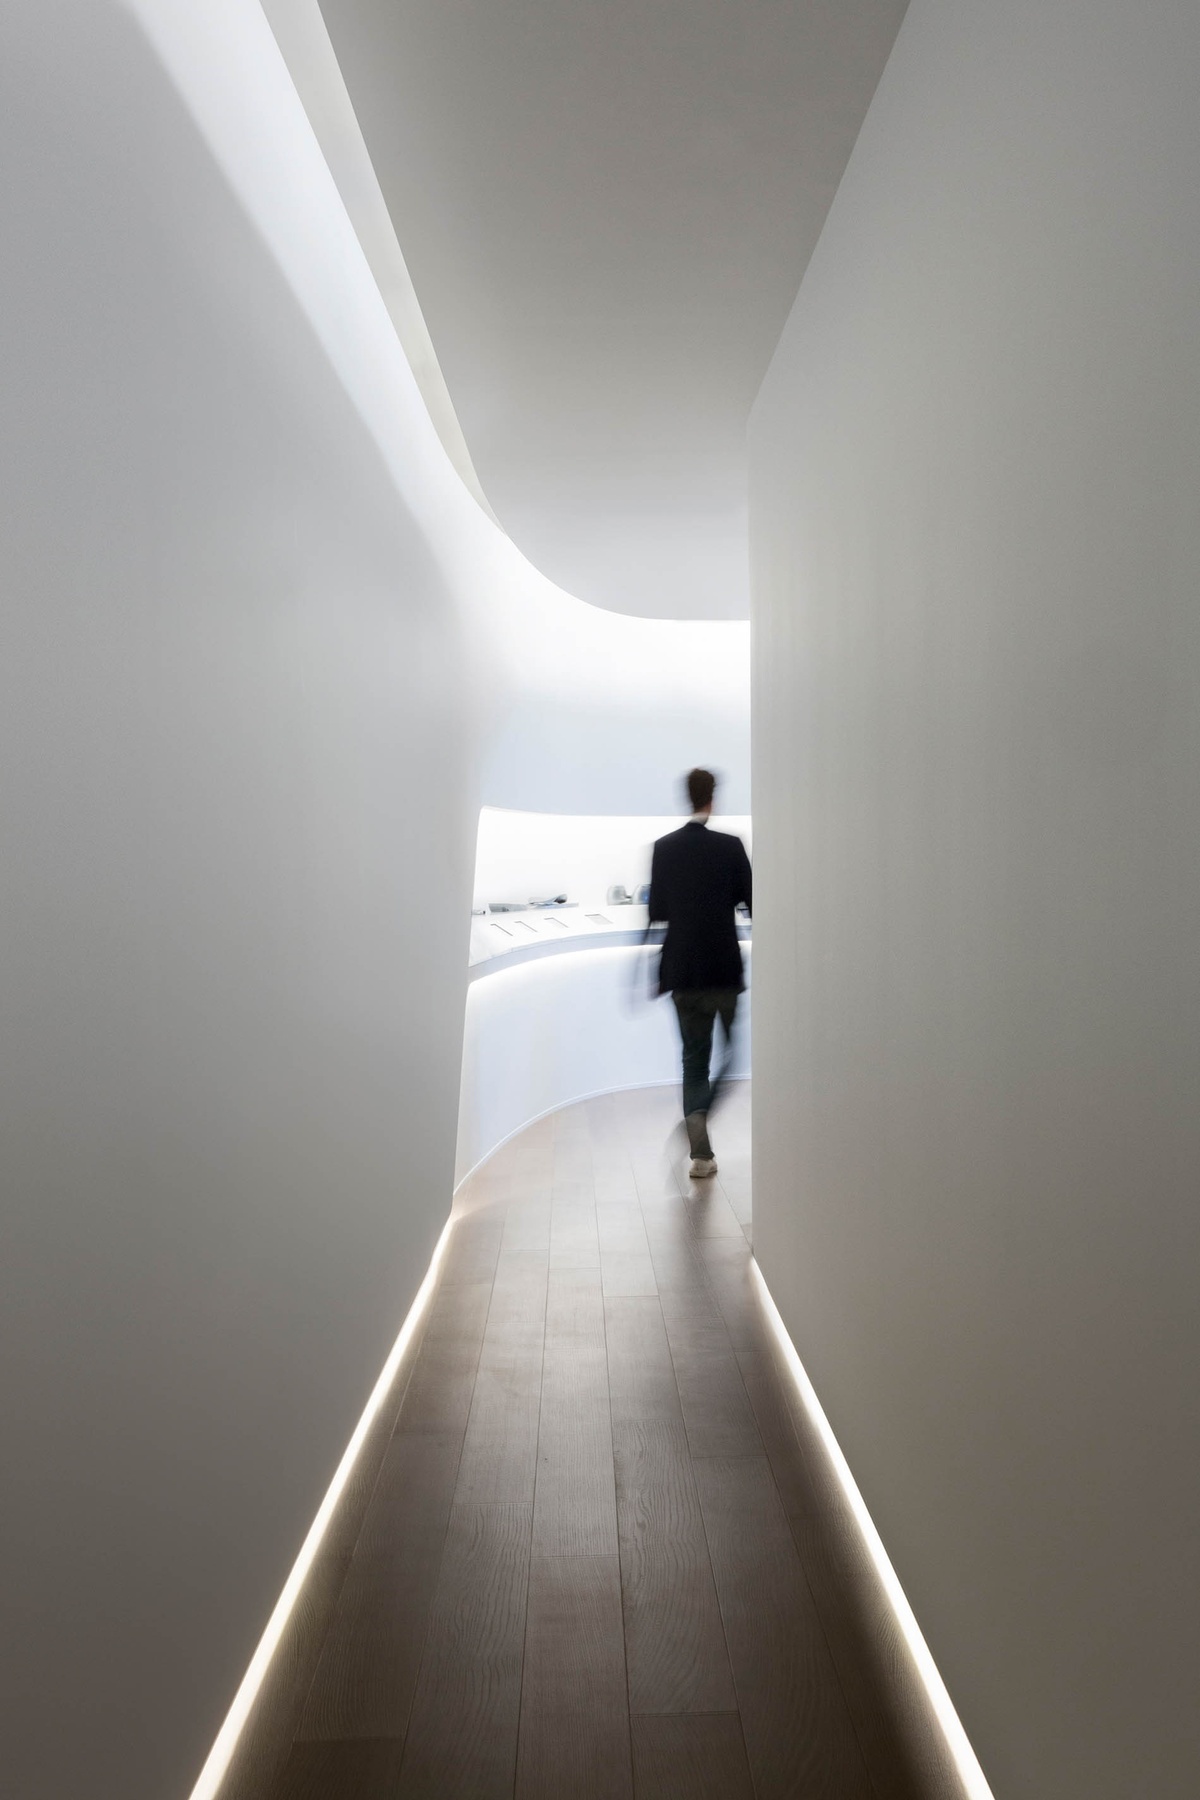 Image of person walking to the end of a long hallway, which opens up to a well-lit space